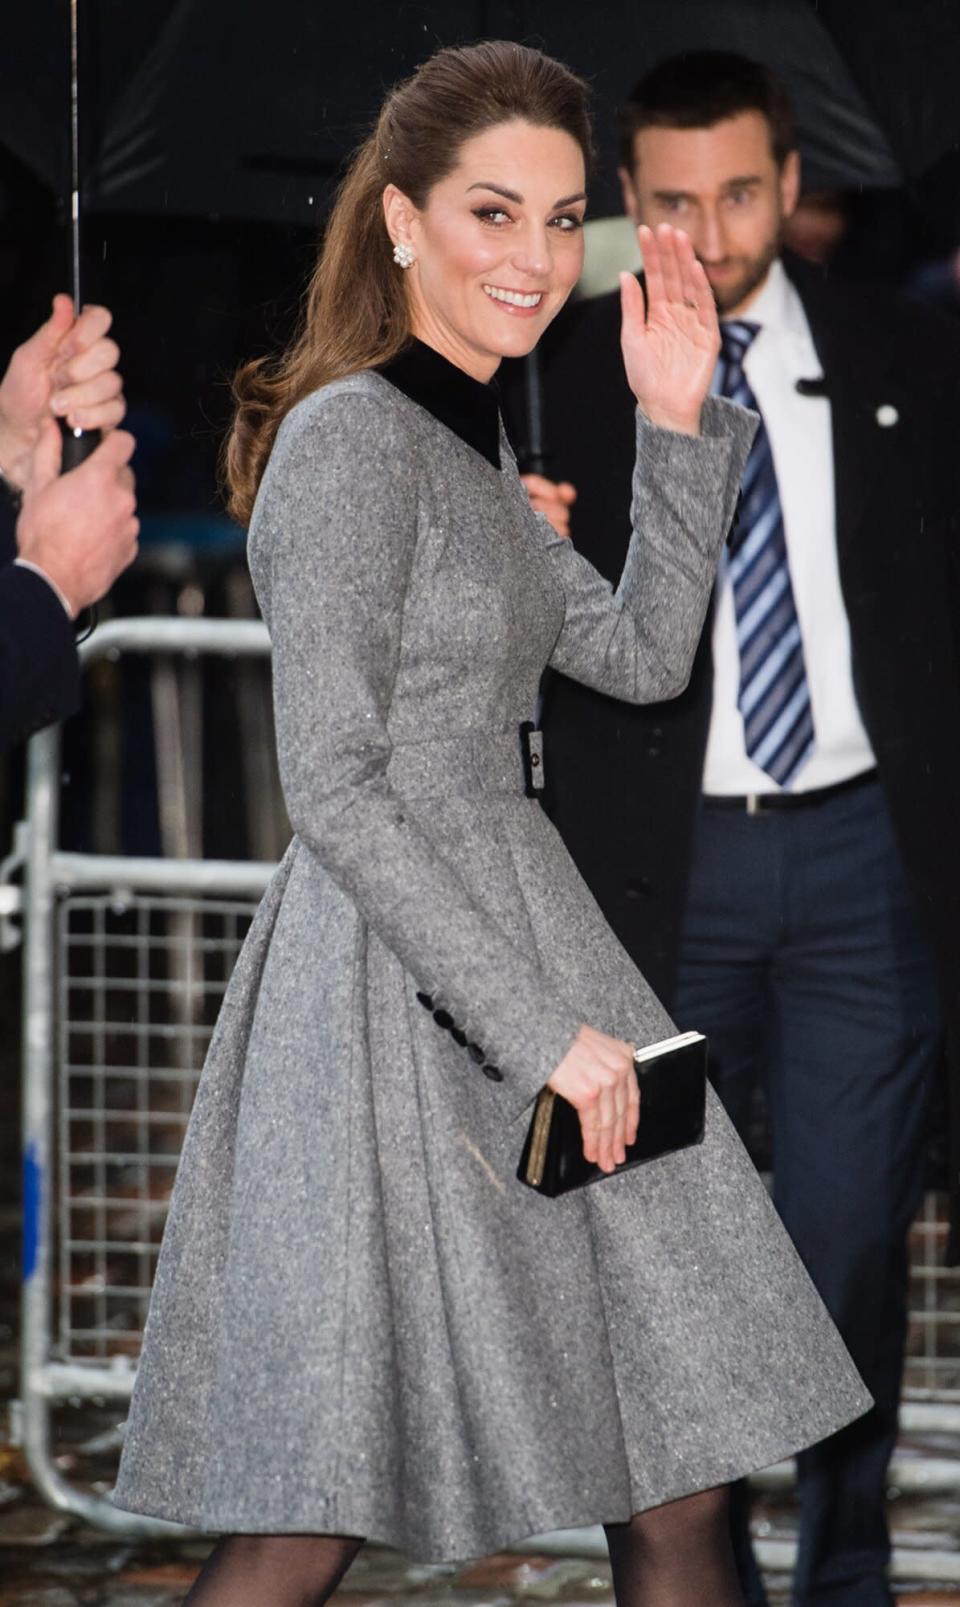 Catherine, Duchess of Cambridge attend the UK Holocaust Memorial Day Commemorative Ceremony in Westminster on January 27, 2020 in London, England